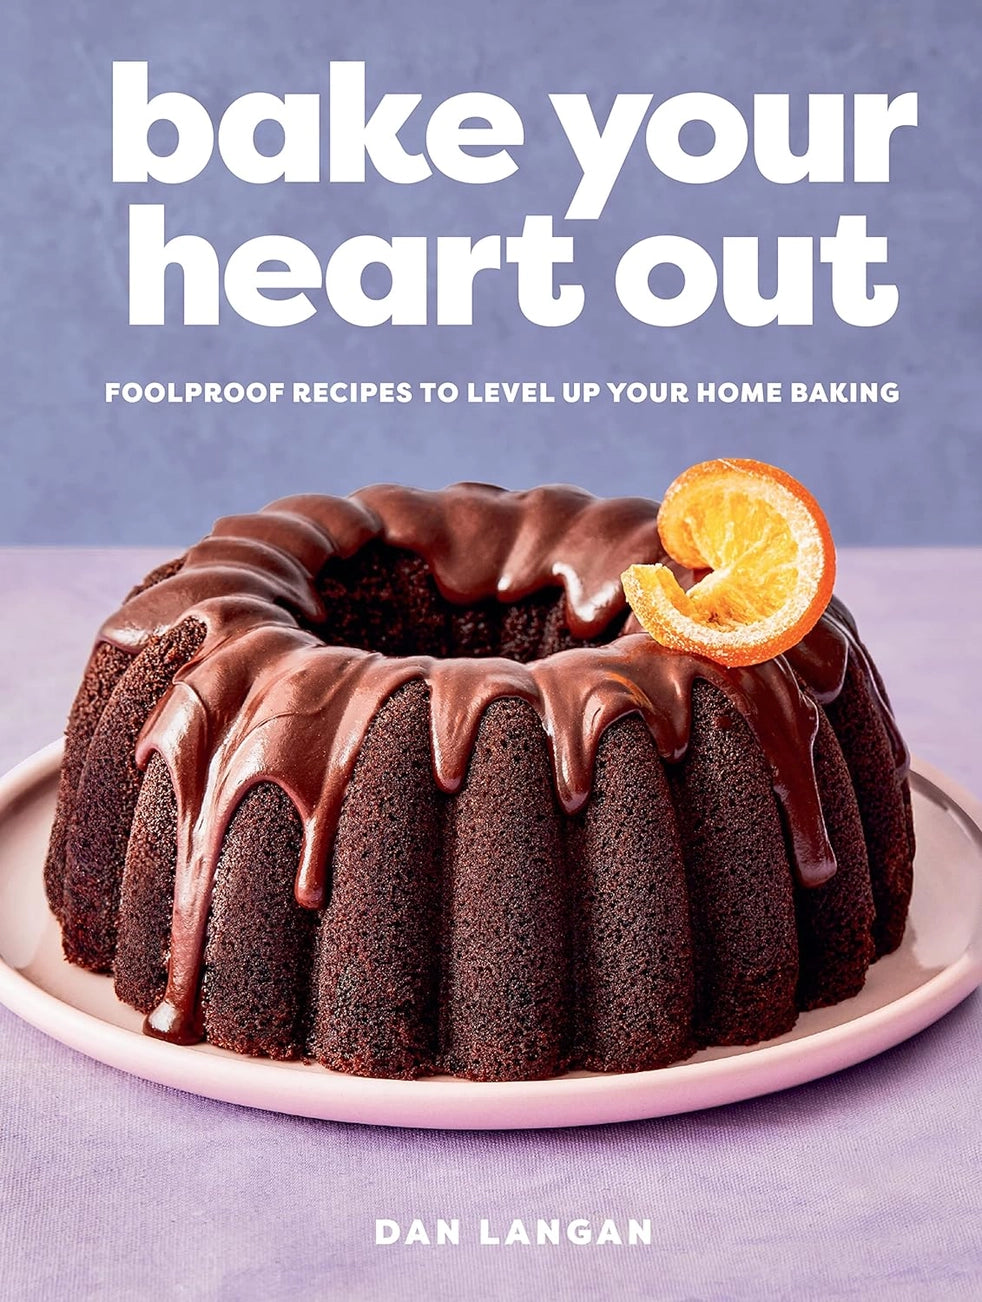 Bake Your Heart Out: Foolproof Baking Recipes